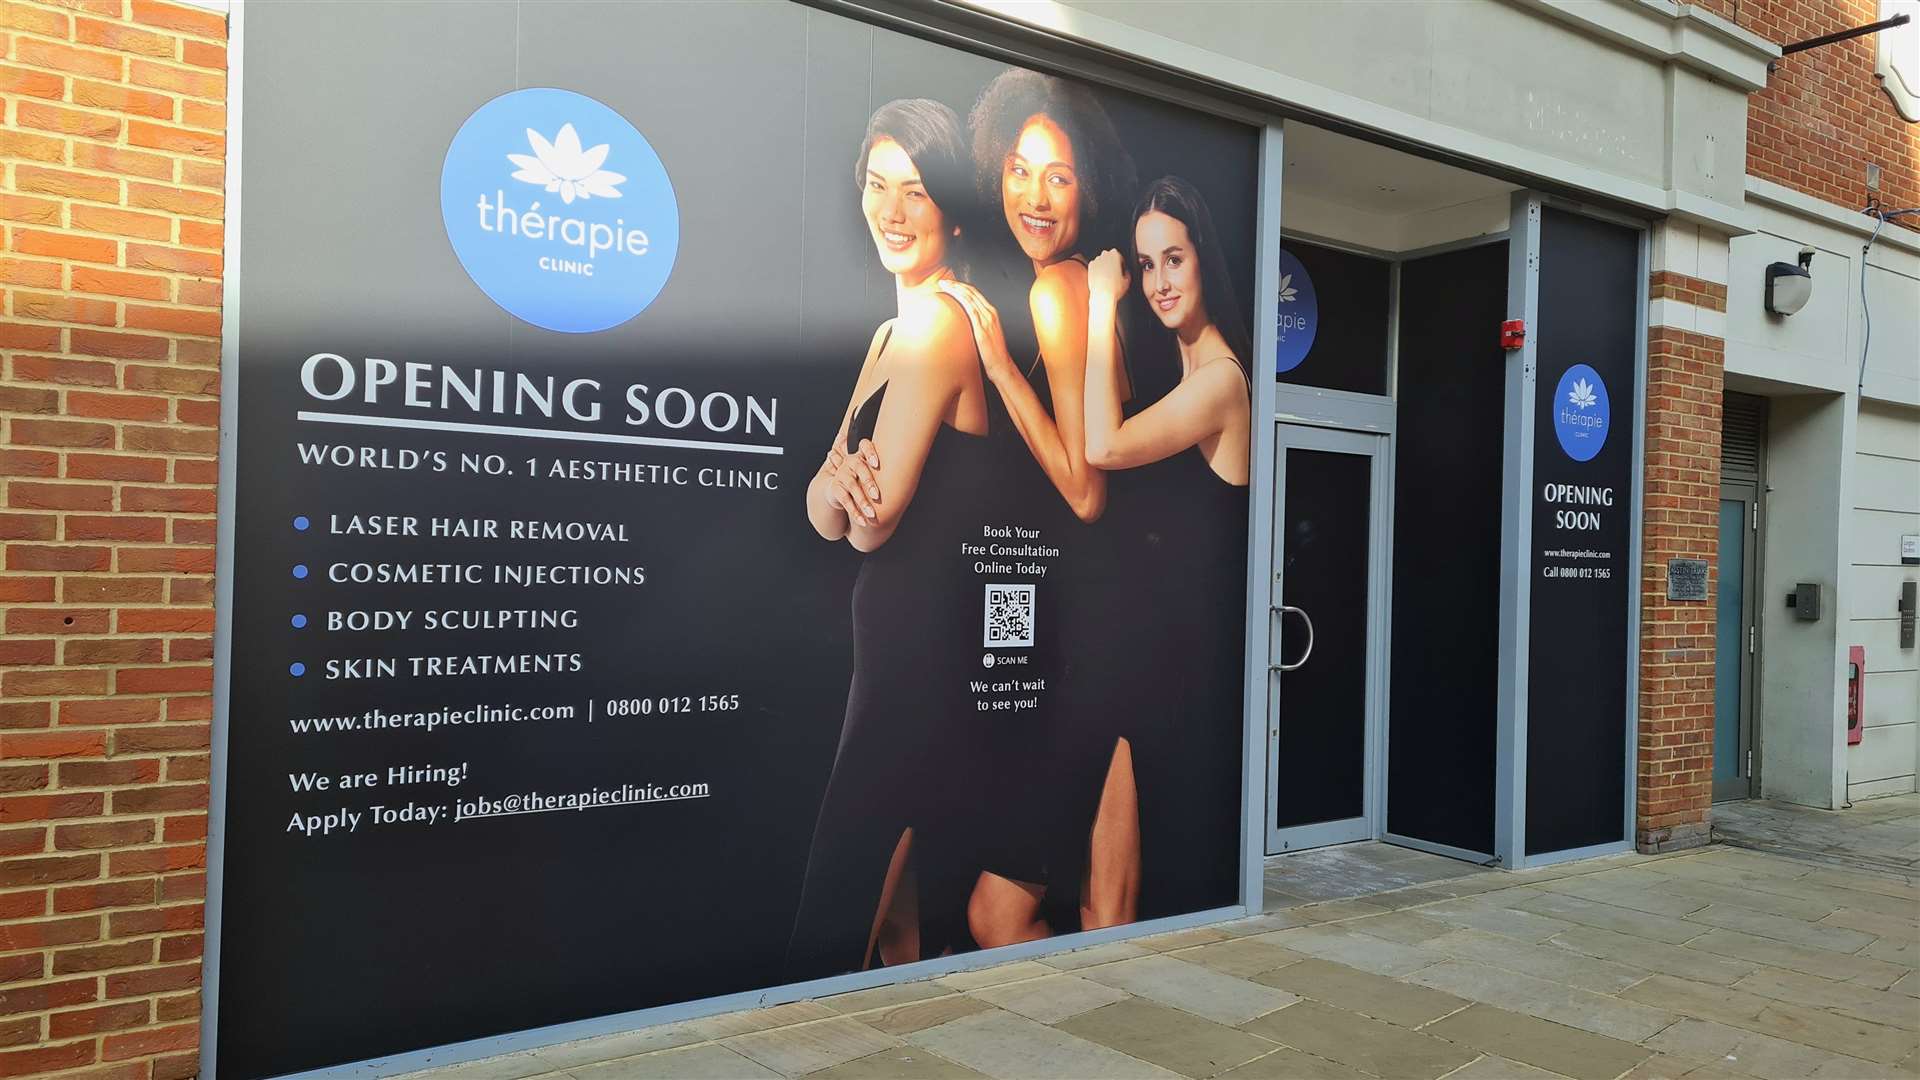 The Therapie Clinic is opening in Whitefriars